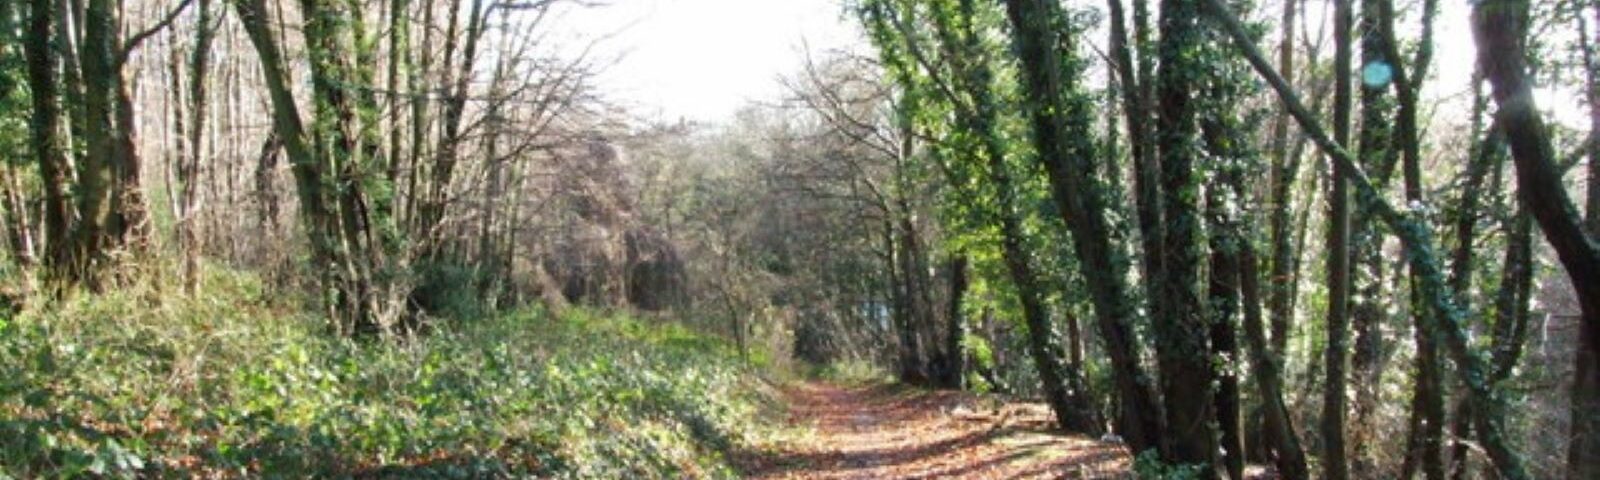 Wooded path in Lordswood